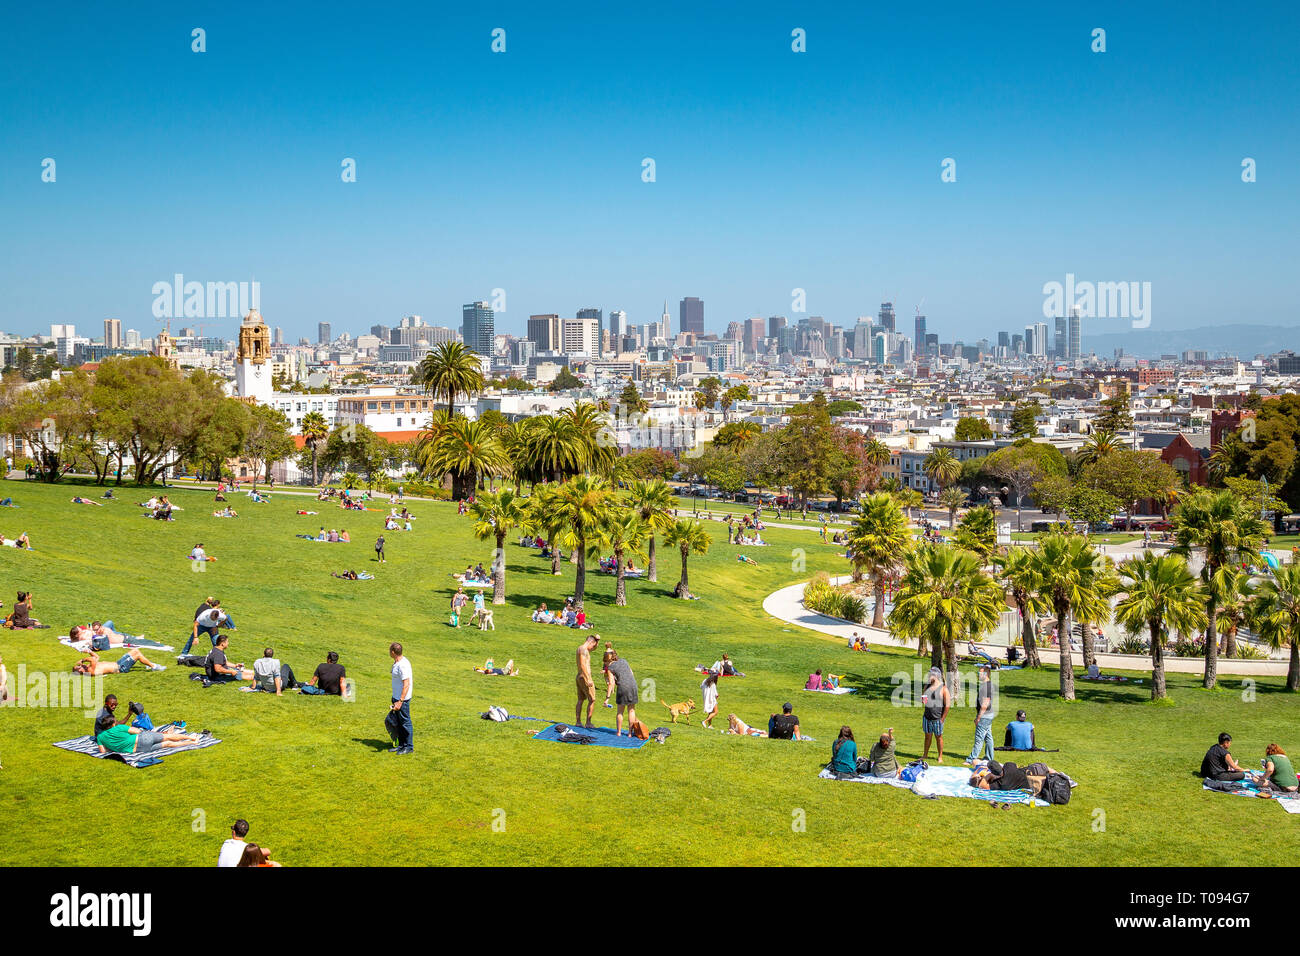 Panorama view of people enjoying the sunny weather on a beautiful day with clear blue skies with the skyline of San Francisco in the background, USA Stock Photo